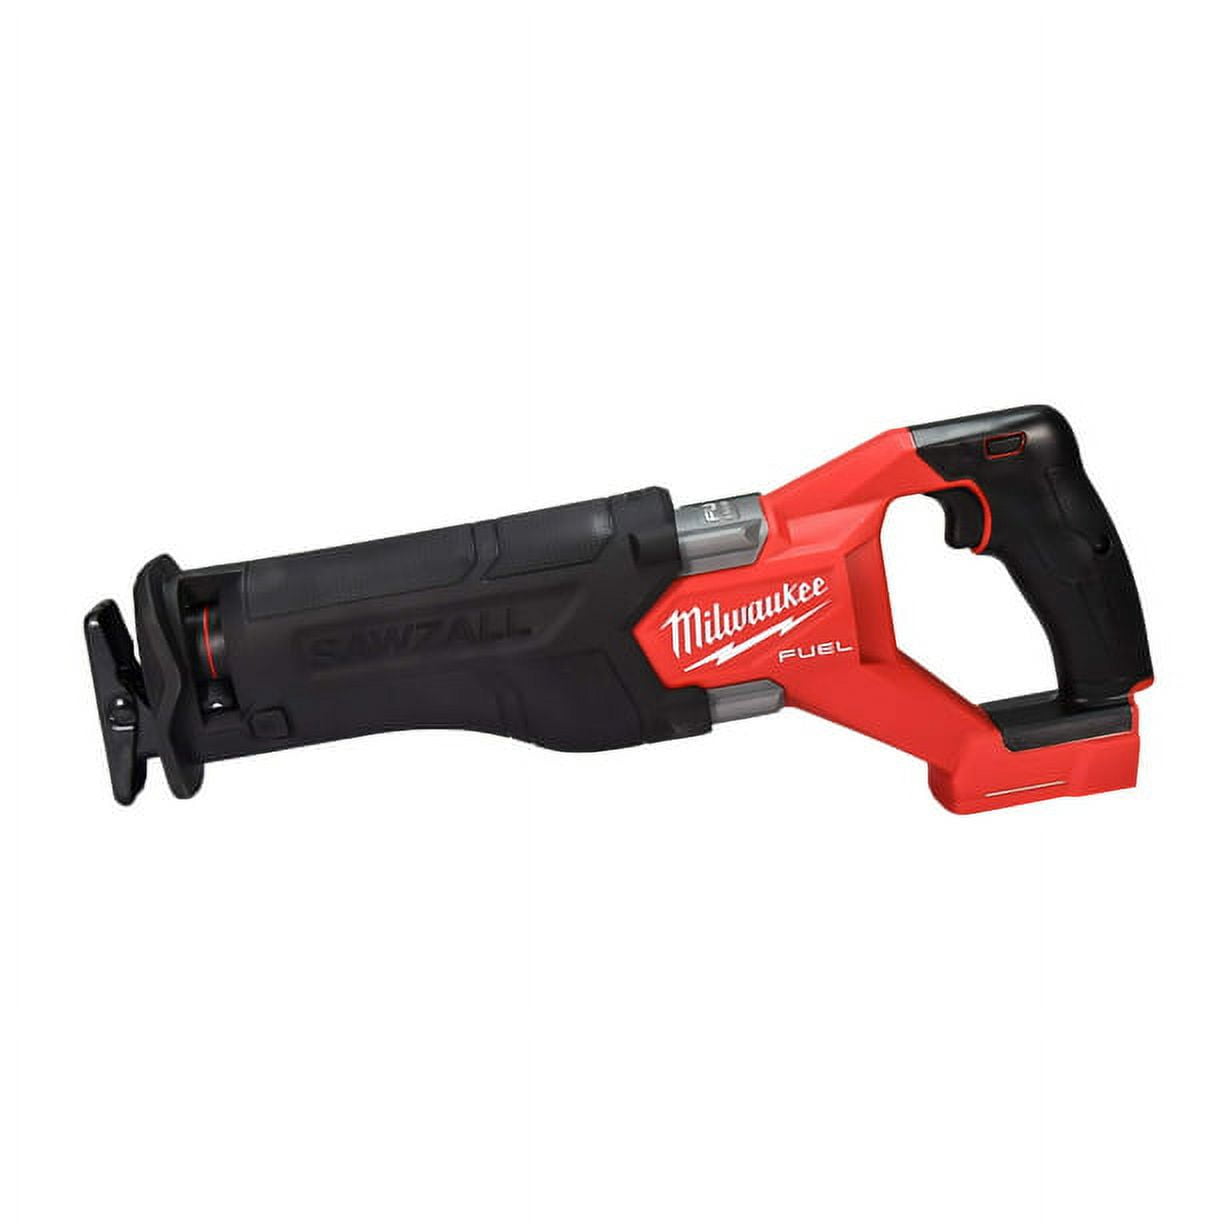 Milwaukee M18 Fuel Sawzall Brushless Cordless Reciprocating Saw No Charger,  No Battery, Bare Tool Only